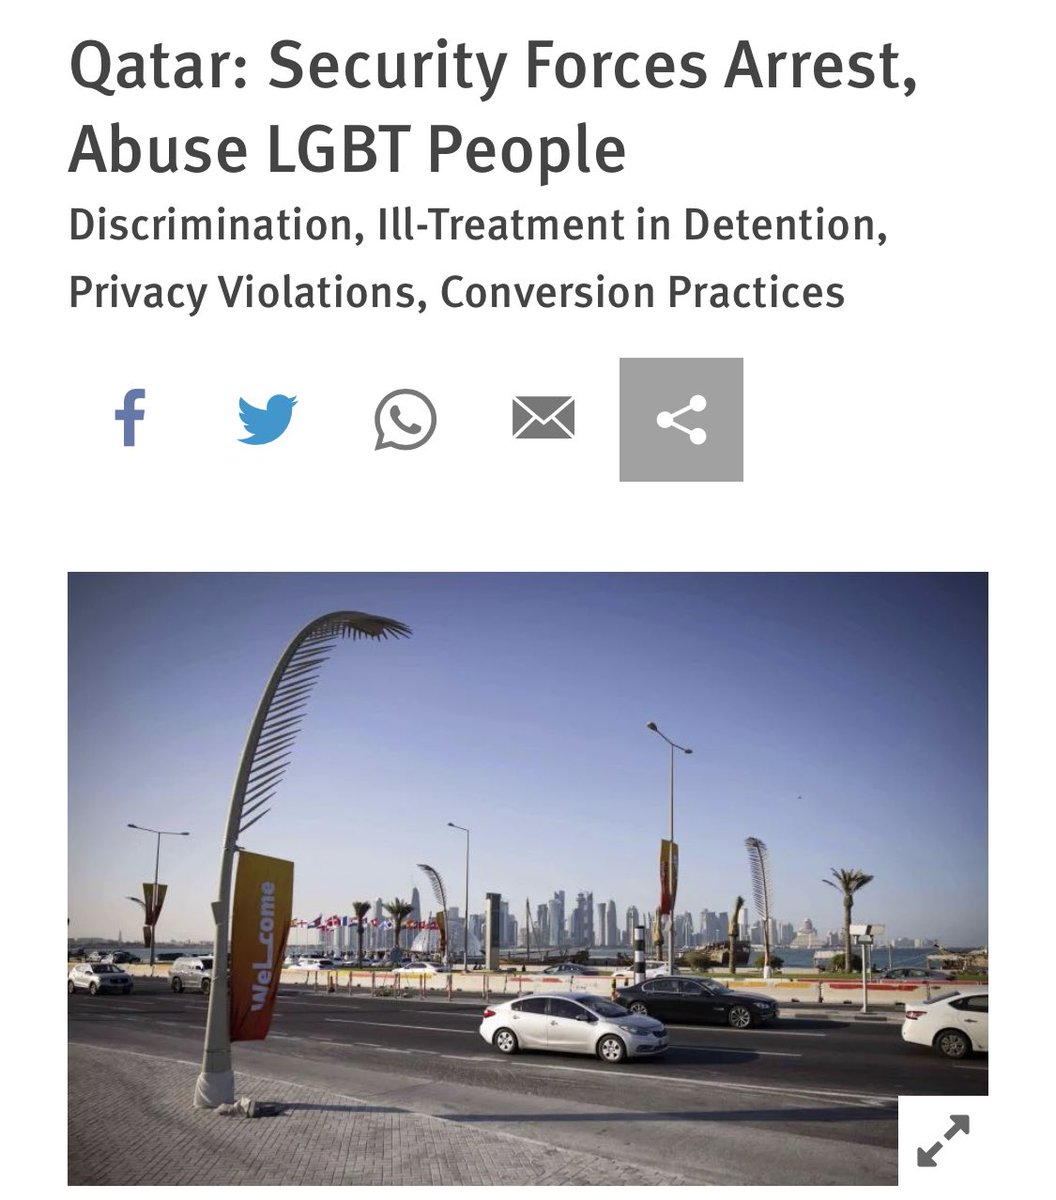 Read important new Human Rights Watch reporting on #LGBT rights abuses in #Qatar, documenting how—with the #Qatar2022 @FIFAcom #WorldCup only weeks away—Qatari security forces detained+abused LGBT people; @HRW’s @Rasha__Younes: hrw.org/news/2022/10/2…